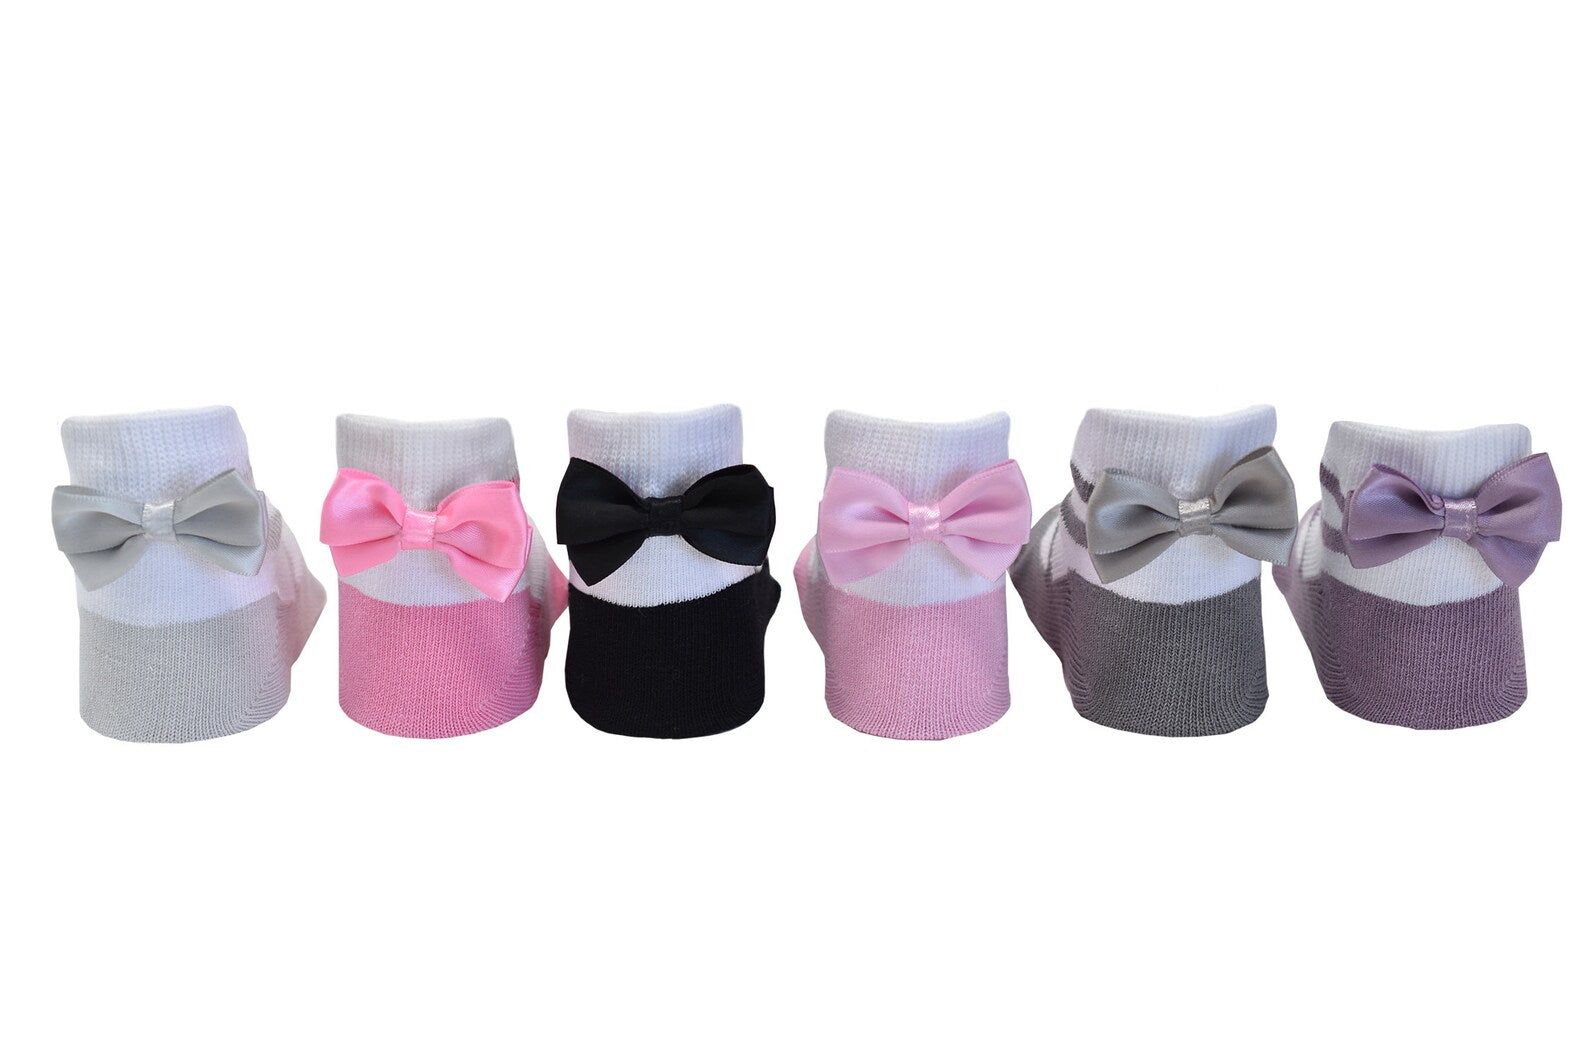 Ballerina socks gift packaged set of 6 pairs 0-12 months infants by Baby Emporio